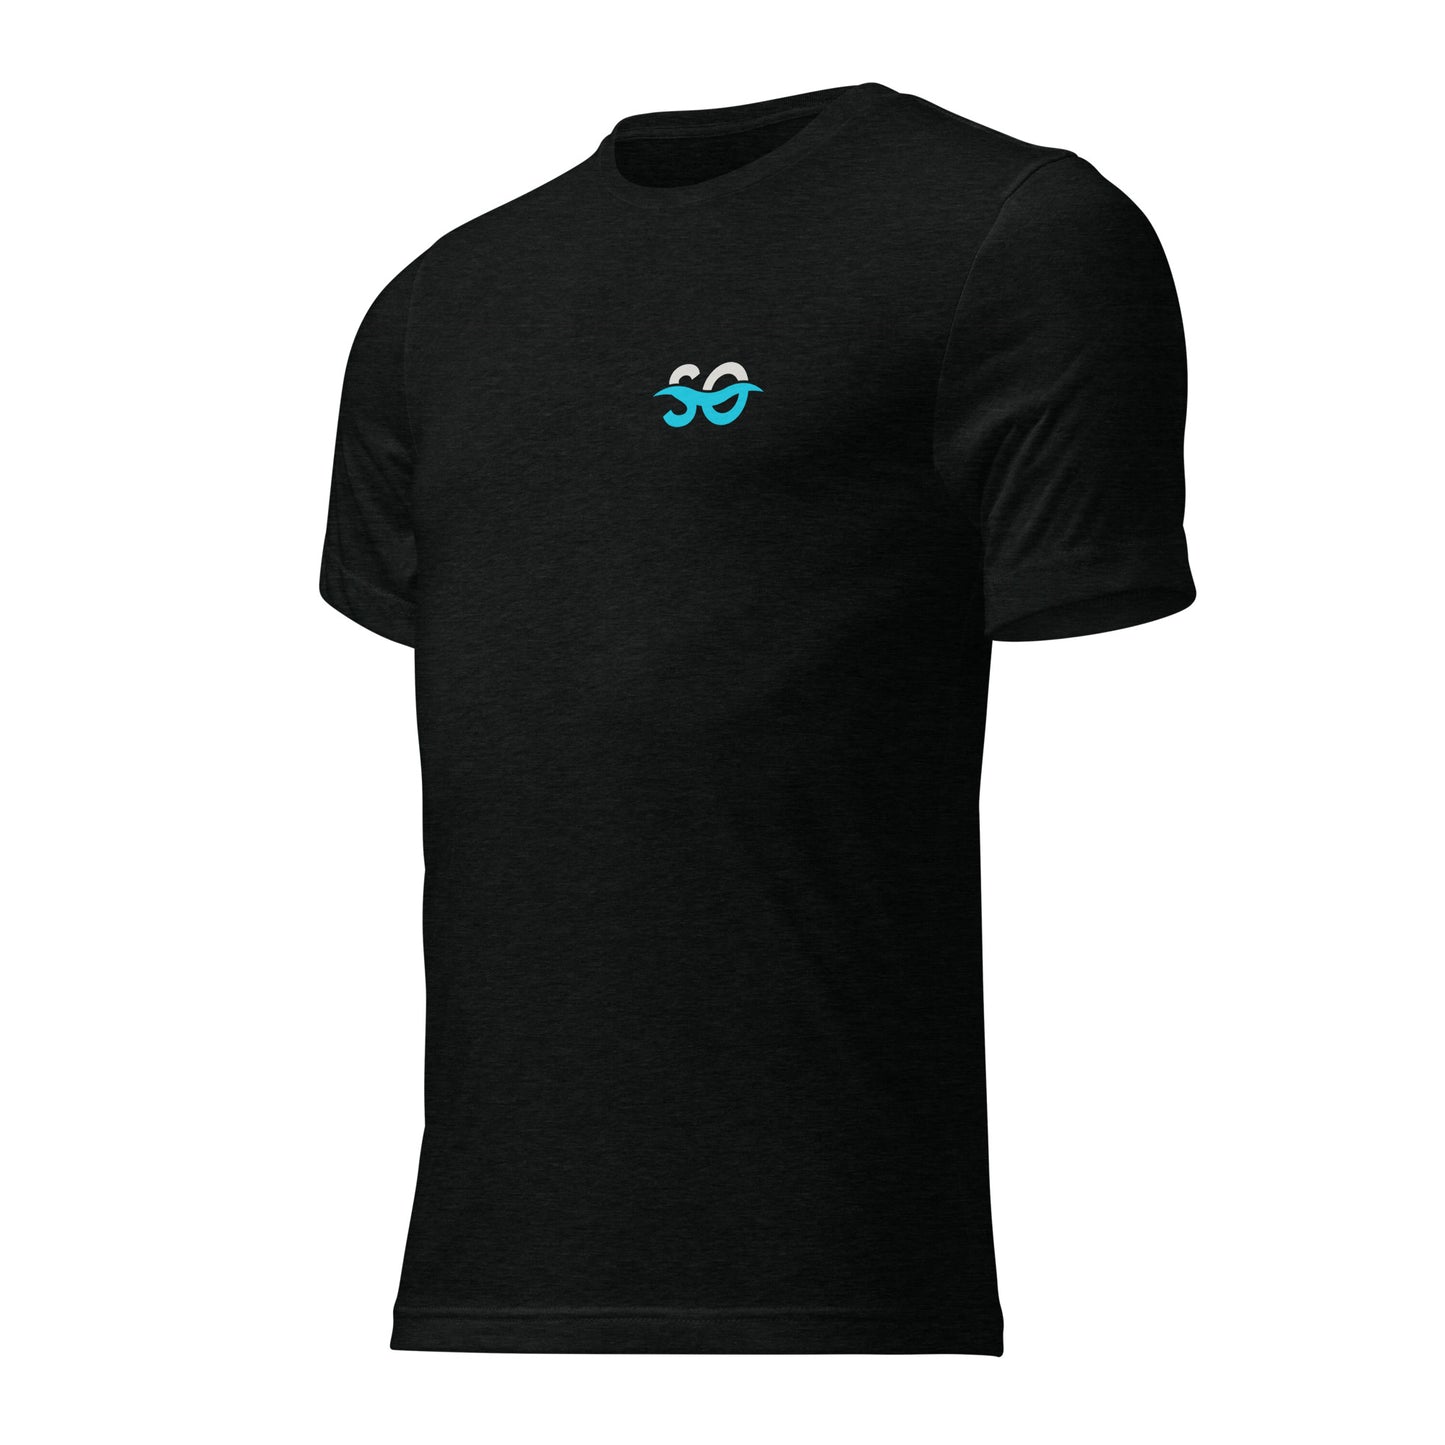 a black t - shirt with the number 50 printed on it